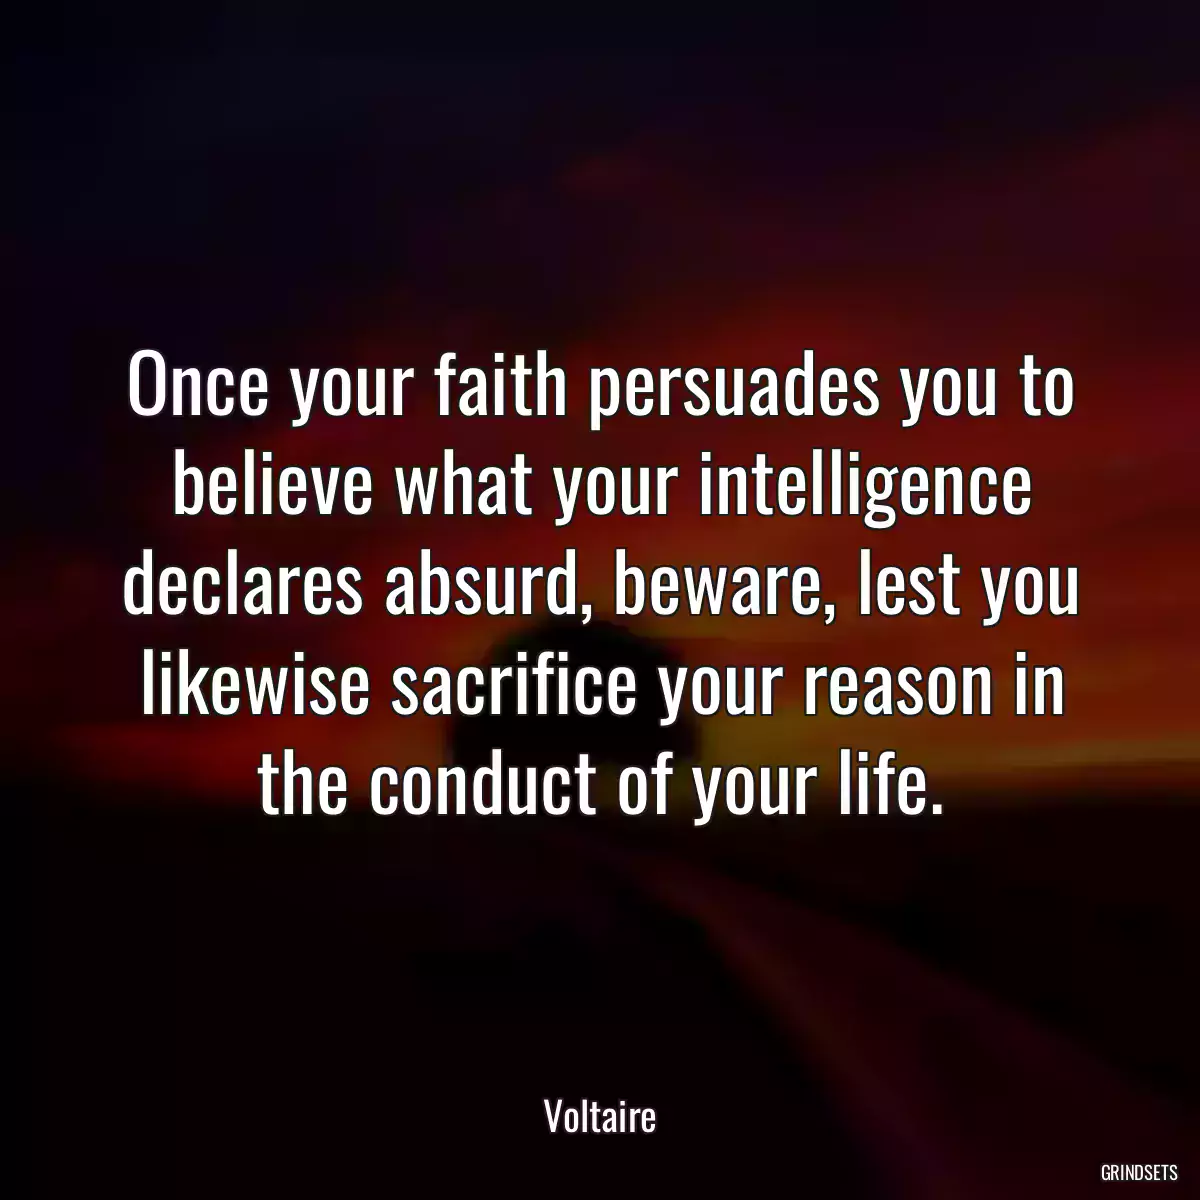 Once your faith persuades you to believe what your intelligence declares absurd, beware, lest you likewise sacrifice your reason in the conduct of your life.